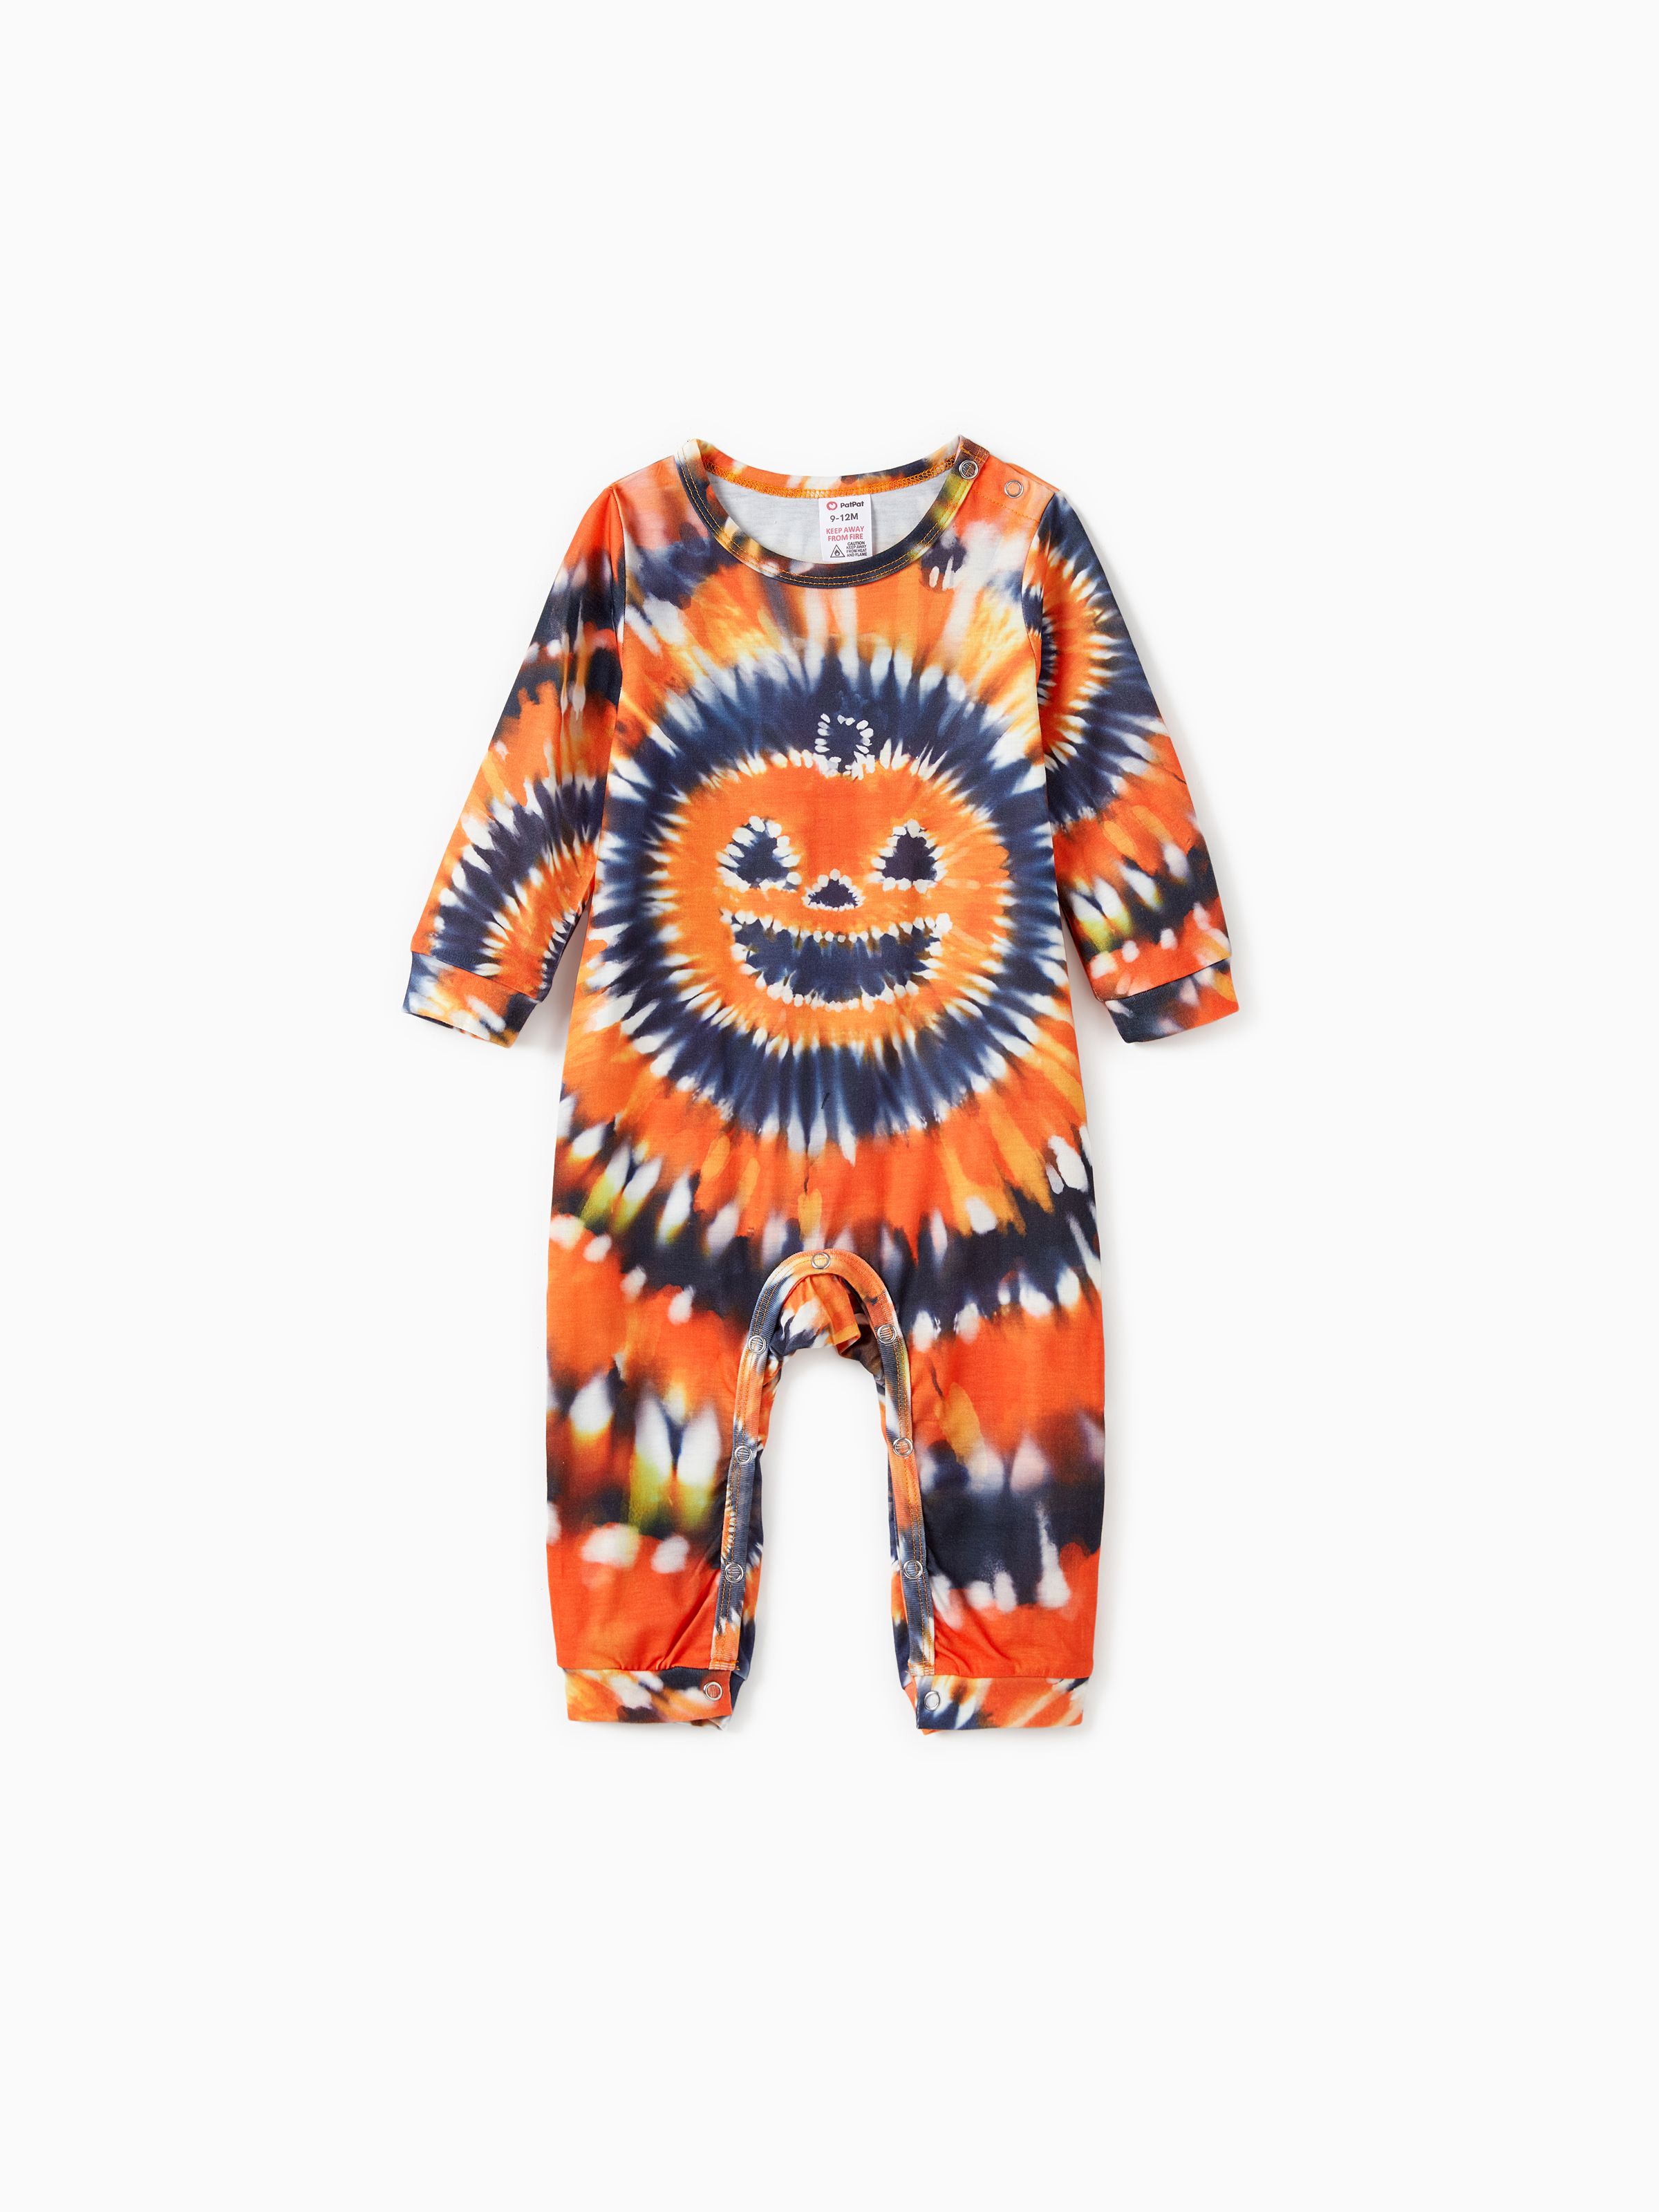 

Halloween Family Matching Orange Pumpkin Tie-Dye Long Sleeve Pajama Sets with Drawstring and Pockets (Flame Resistant)